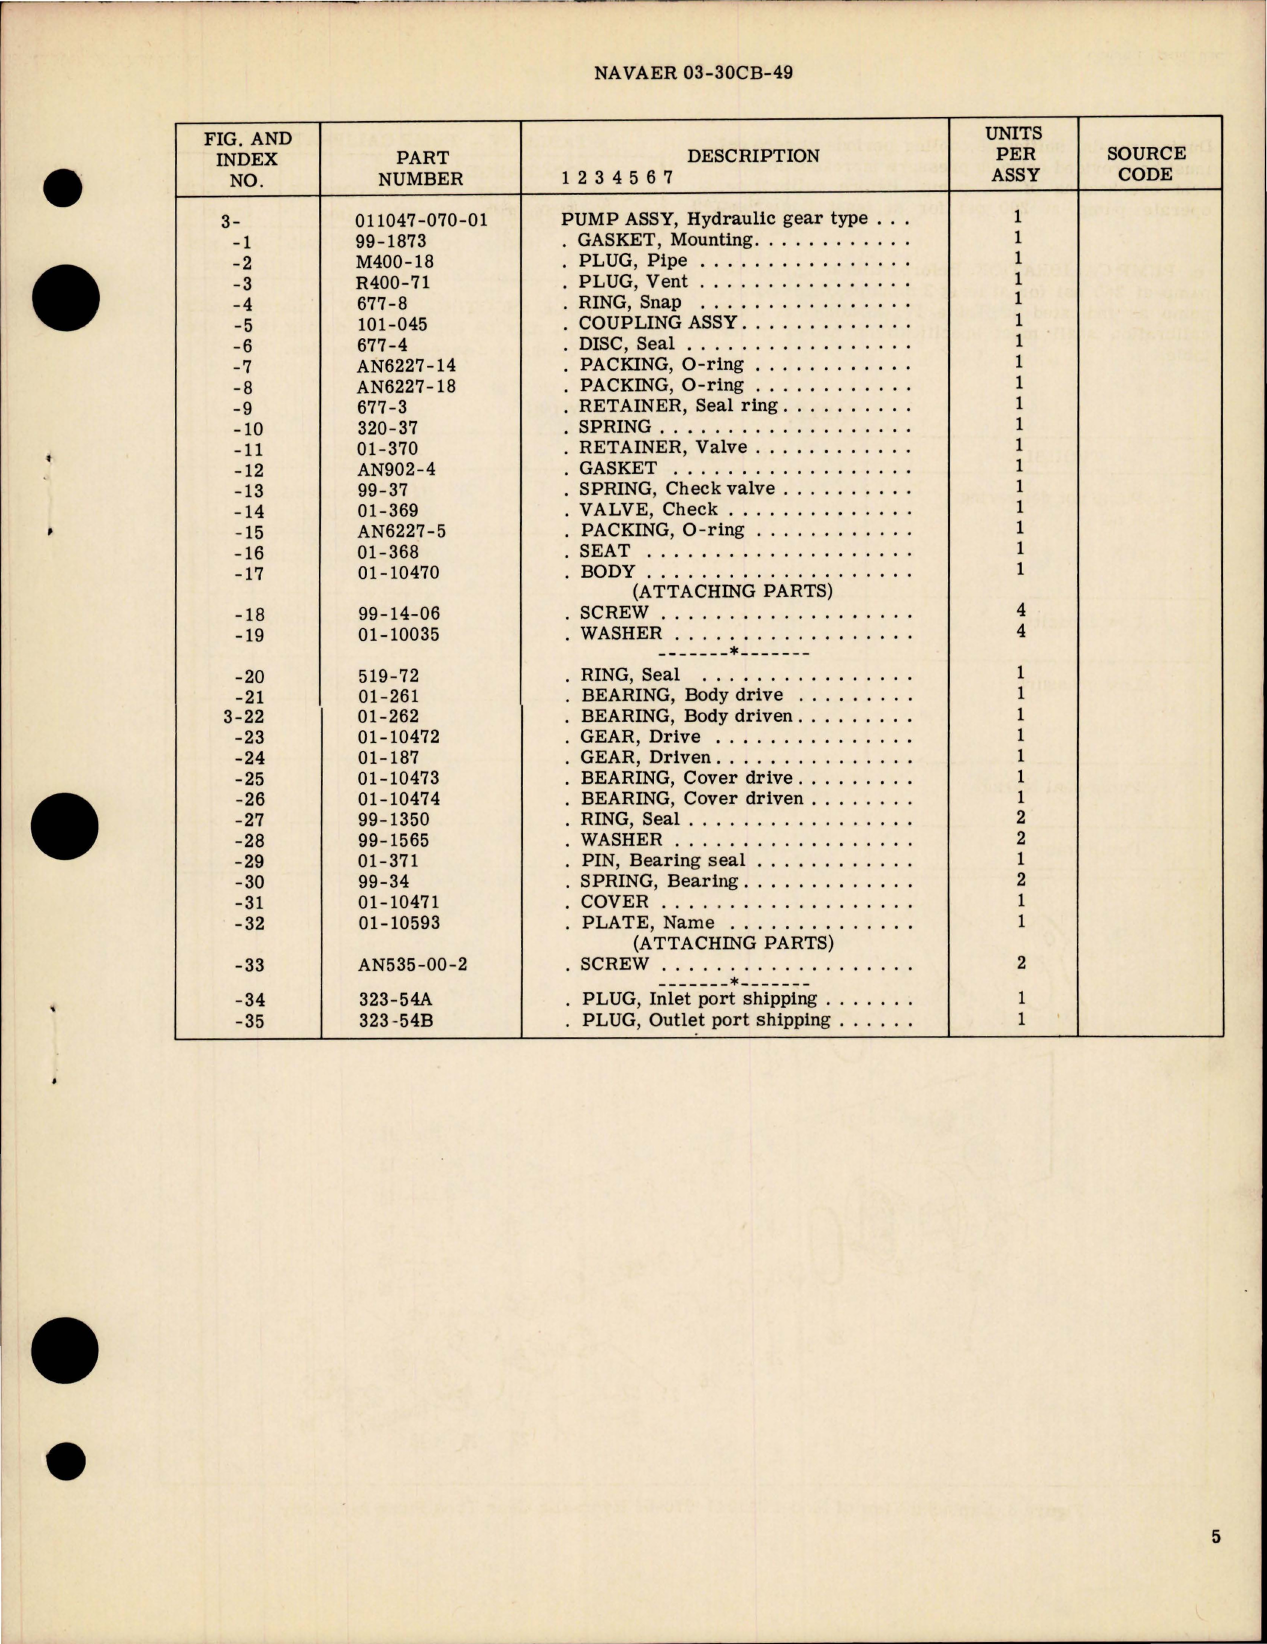 Sample page 5 from AirCorps Library document: Overhaul Instructions with Parts Breakdown for Hydraulic Gear Type Pump Assembly - Model 011047-070-01 